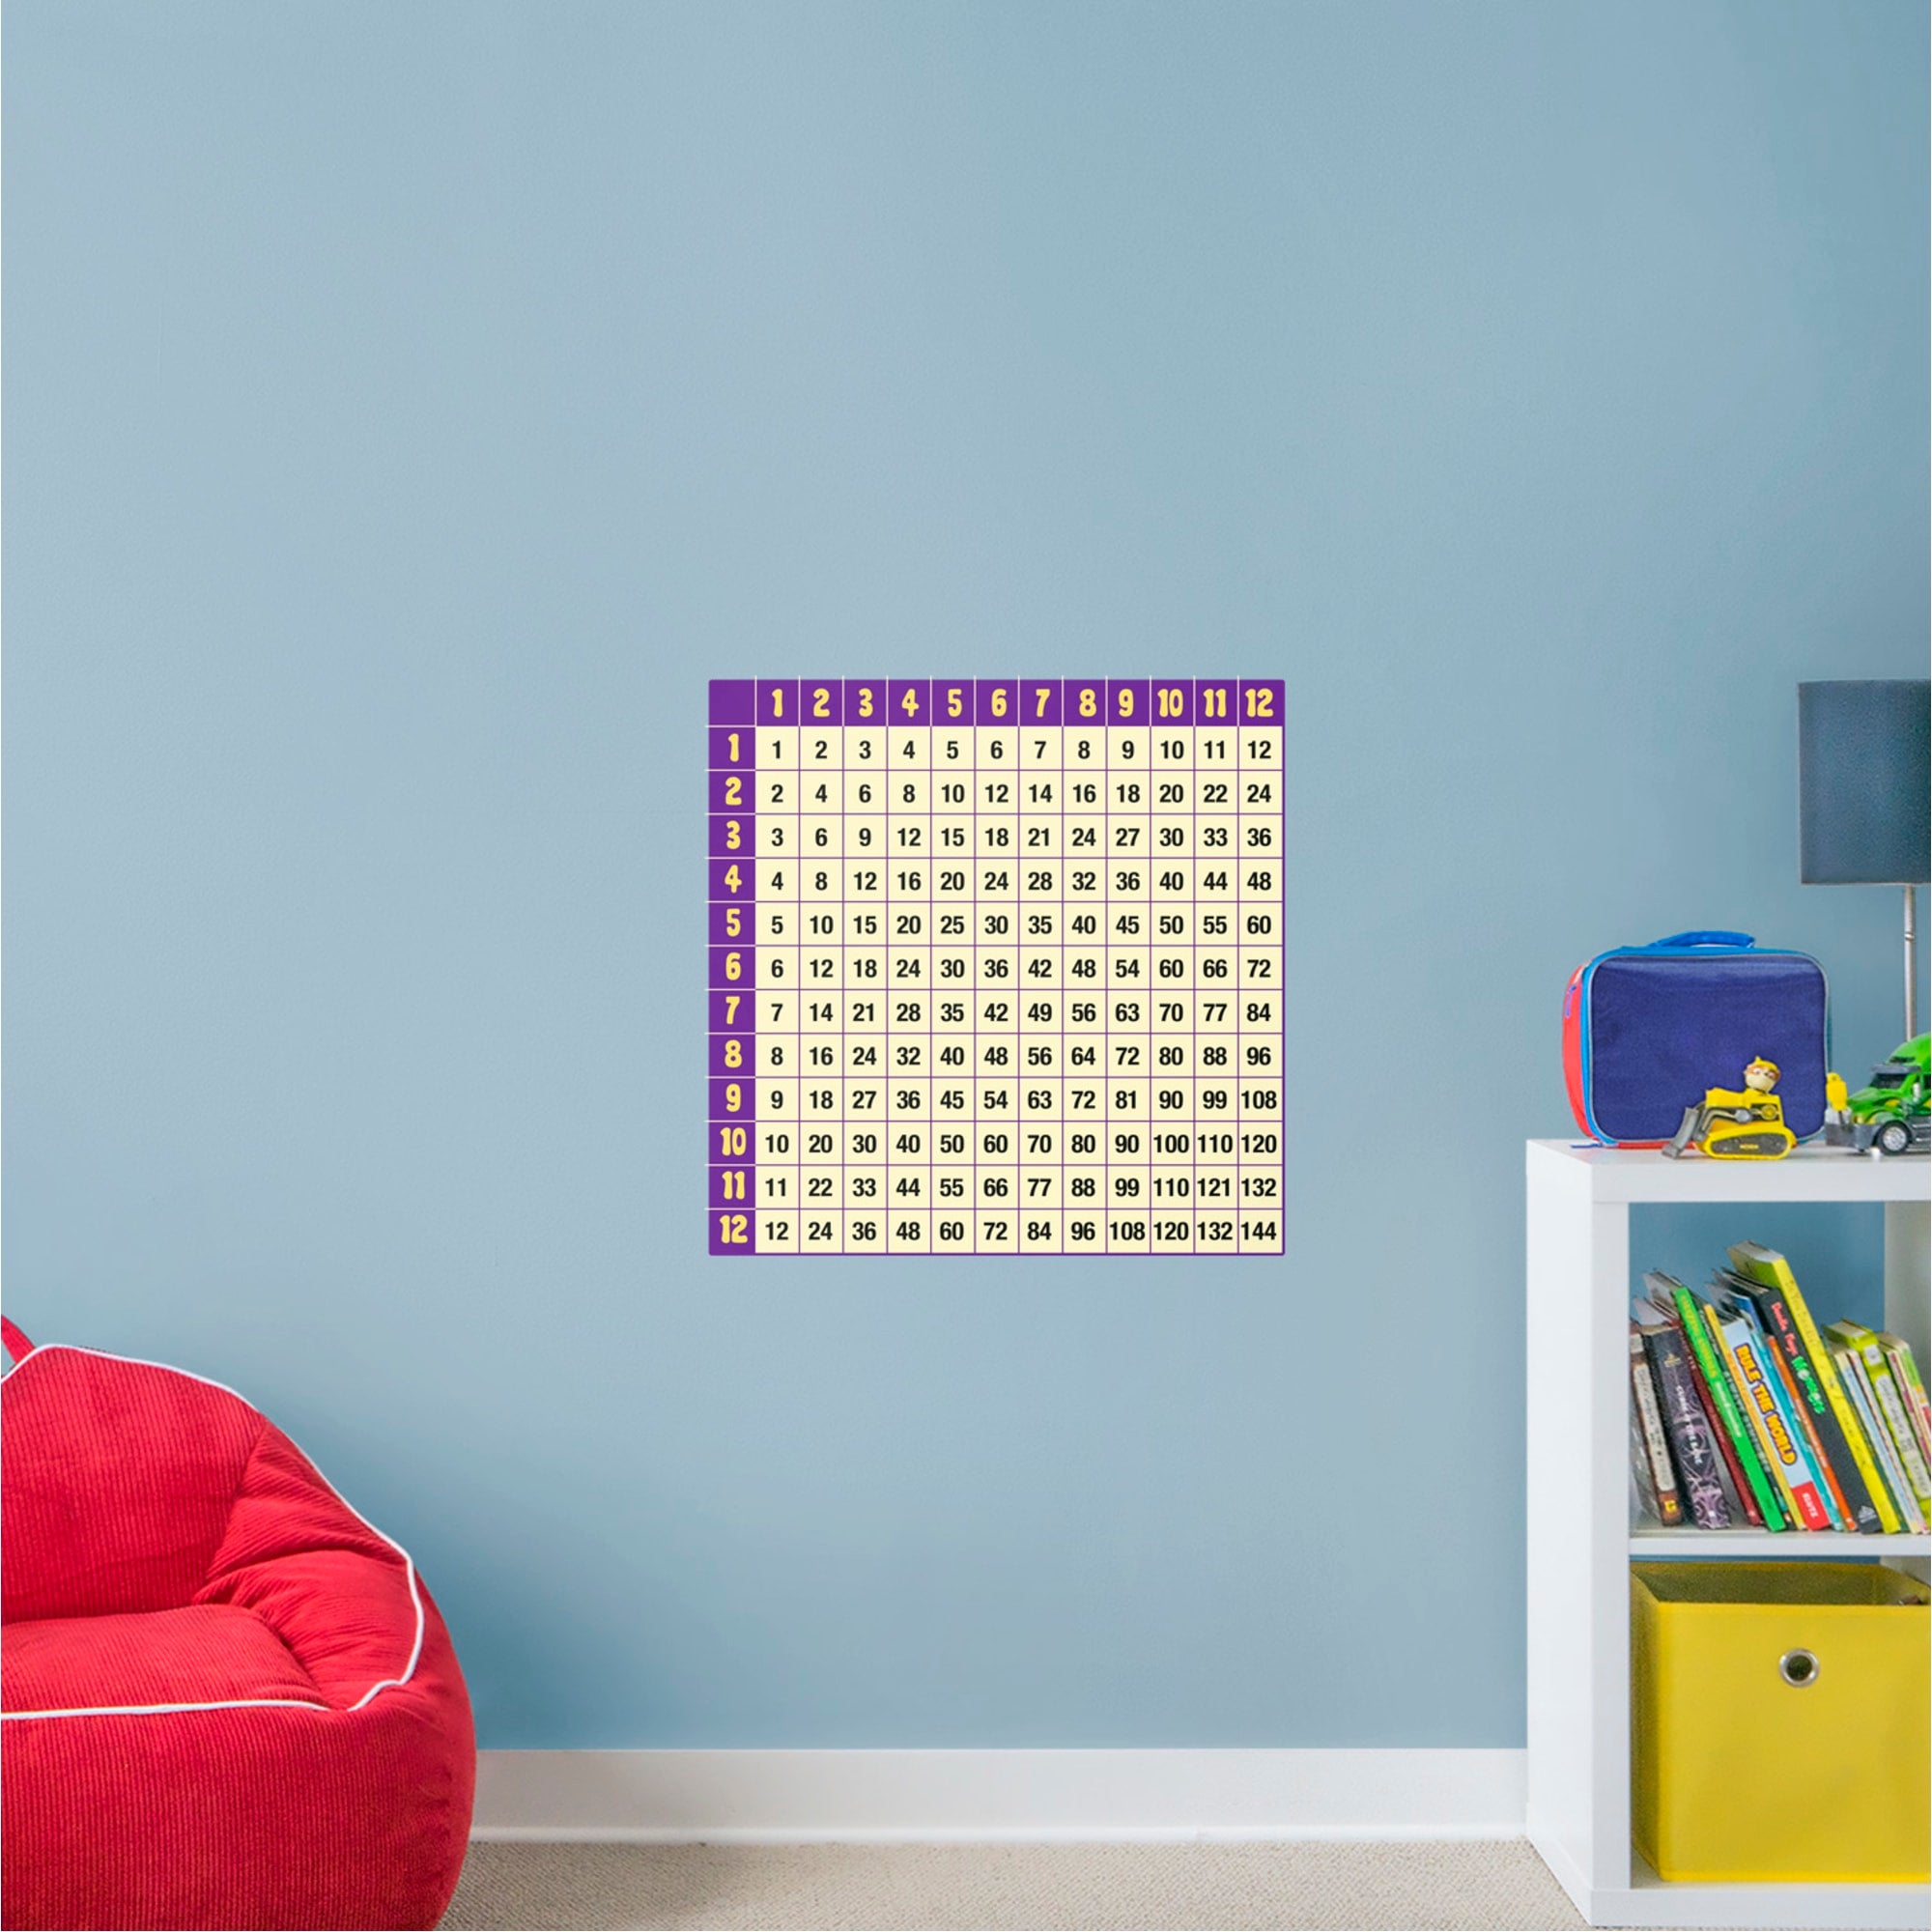 Multiplication Chart - Removable Dry Erase Vinyl Decal 24.0"W x 24.0"H by Fathead